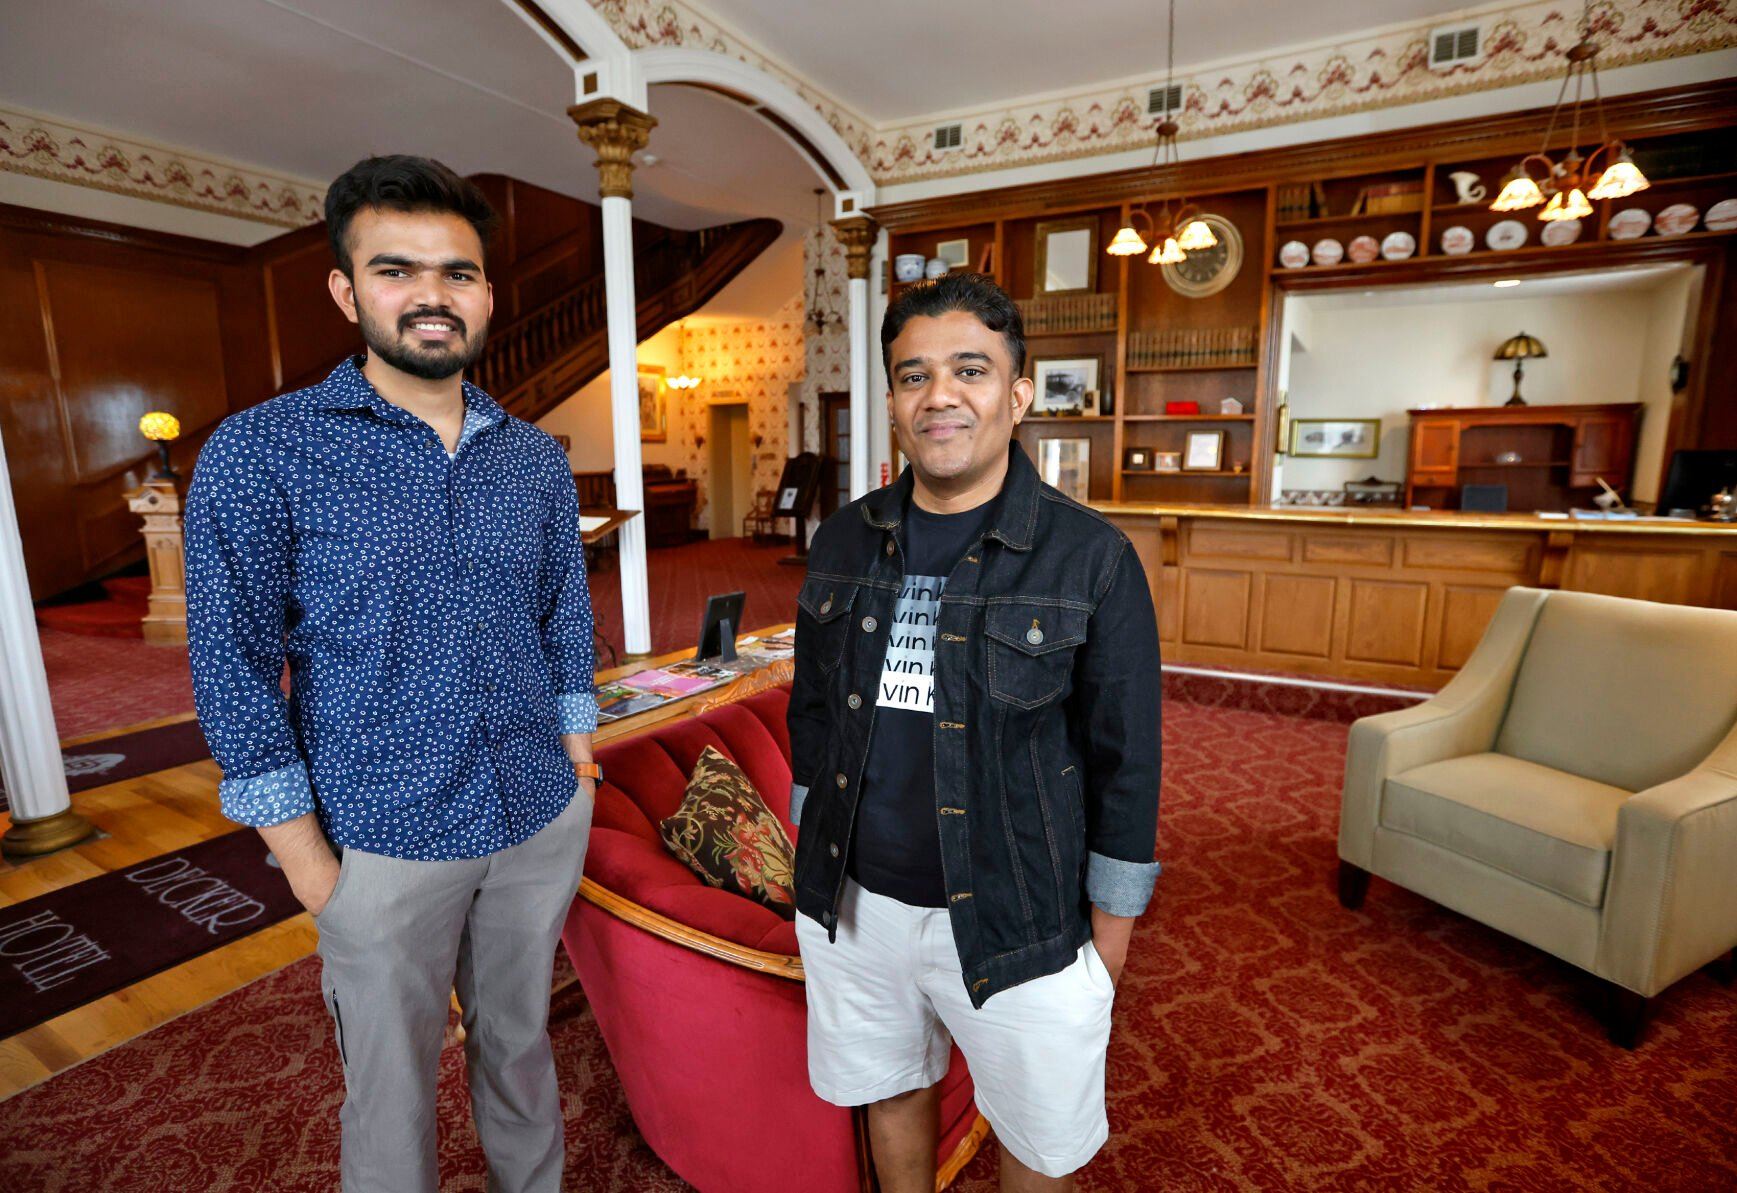 Owner Mihir “Mike” Patel (right) and his business partner Maher Patel stand at the Decker House Hotel in Maquoketa, Iowa.    PHOTO CREDIT: JESSICA REILLY